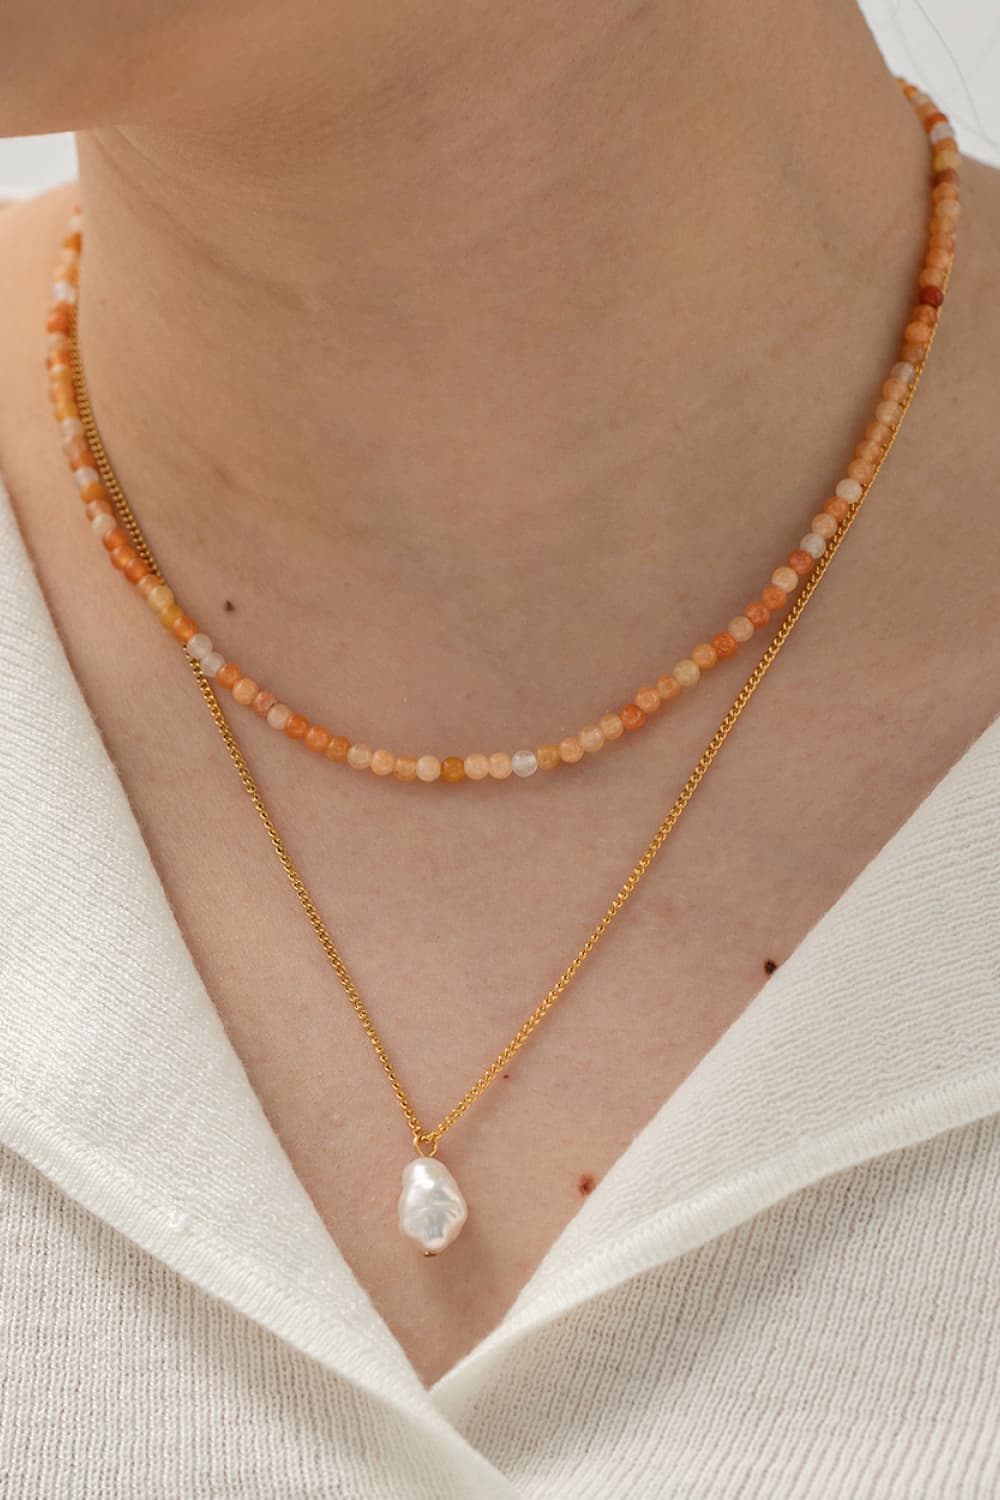 Double-Layered Freshwater Pearl Pendant Necklace - Necklaces - FITGGINS